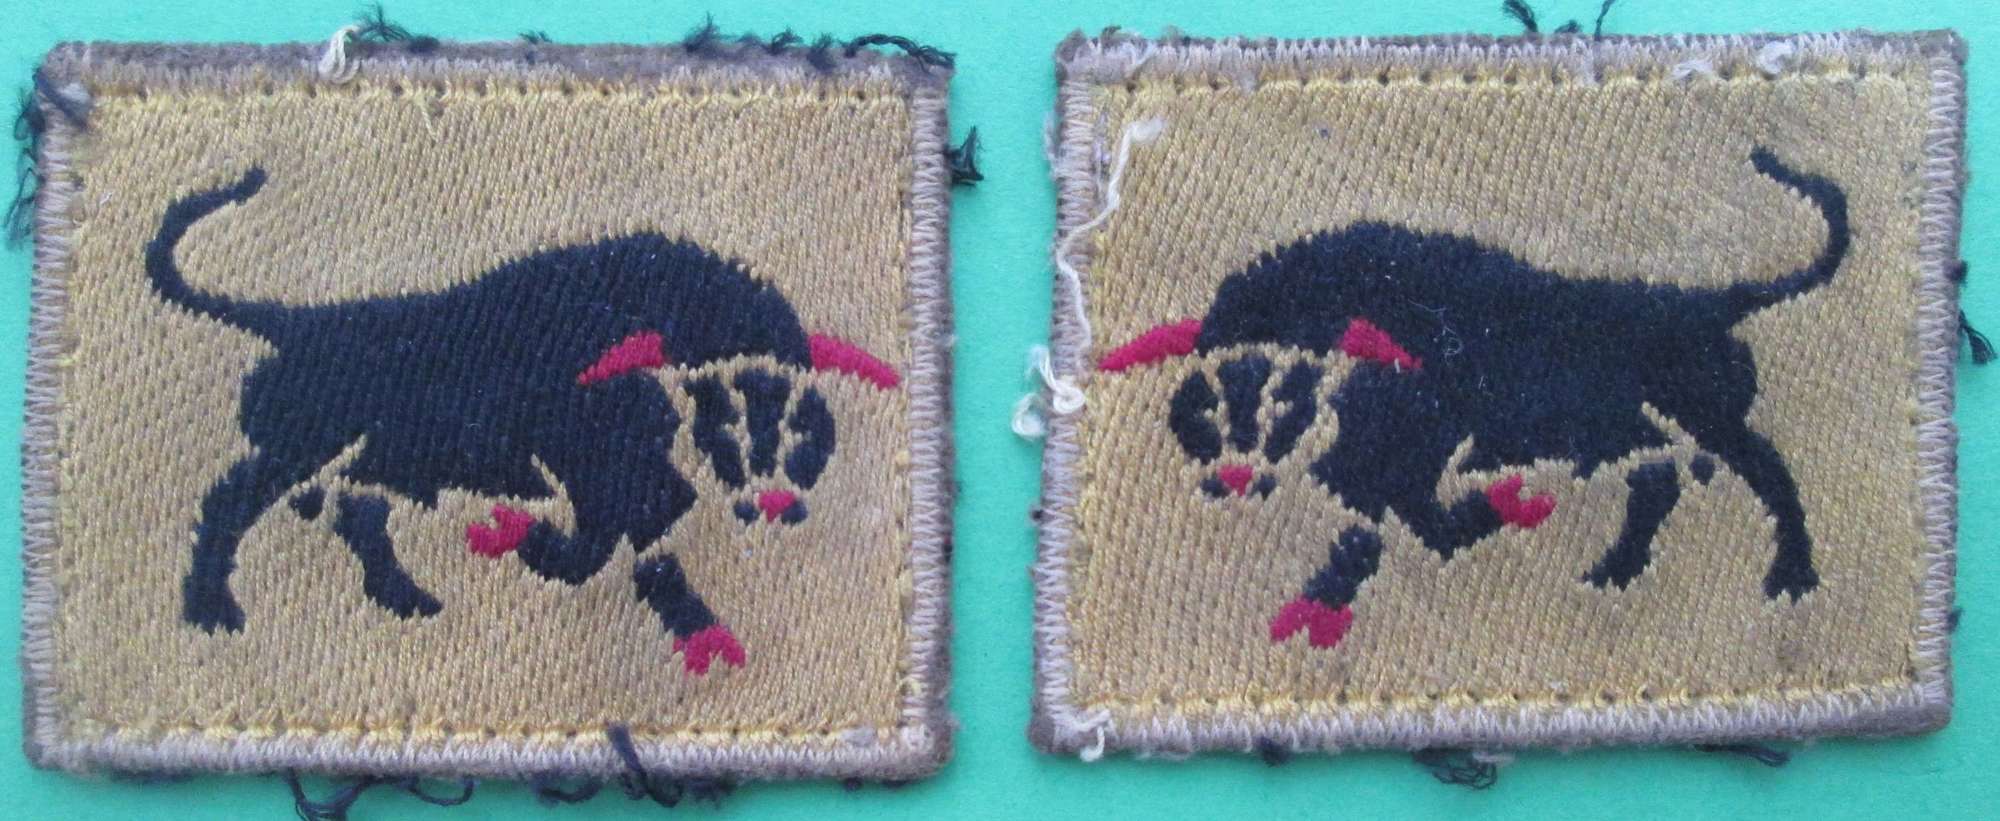 A facing pair of 11th armoured corps formation signs